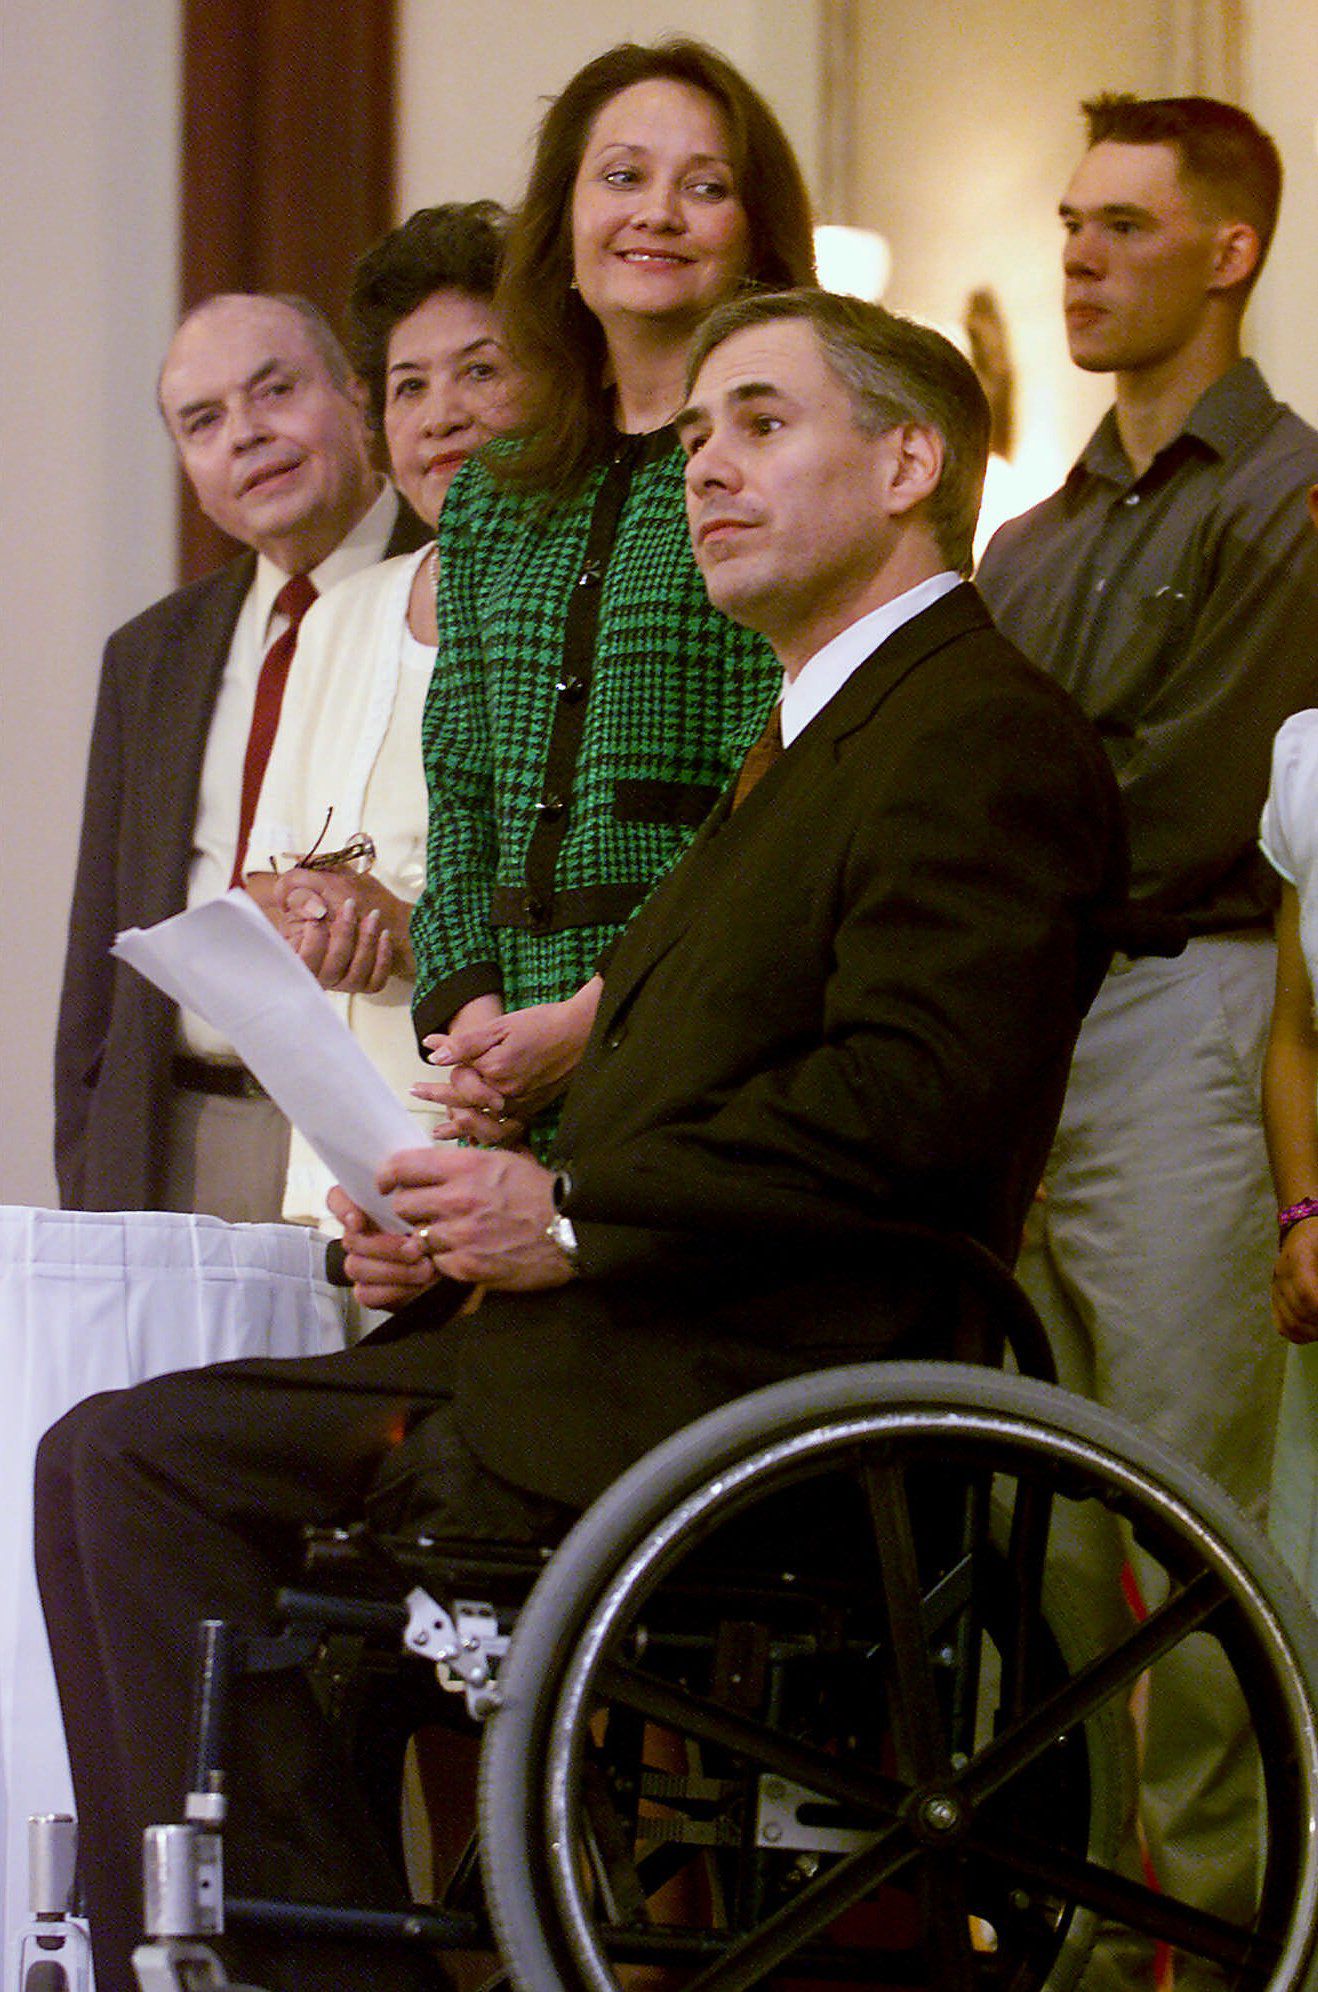 As a Texas Supreme Court justice in June 2001, Greg Abbott announced his candidacy for lieutenant governor as, from left, his father-in-law Bill Phalen, mother-in-law Mary Lucy Phalen and wife Cecilia watched. Later that year, after U.S. Sen. Phil Gramm announced he would not seek re-election, Abbott switched to the attorney general's race after then-Attorney General John Cornyn decided to try to succeed Gramm in Washington.